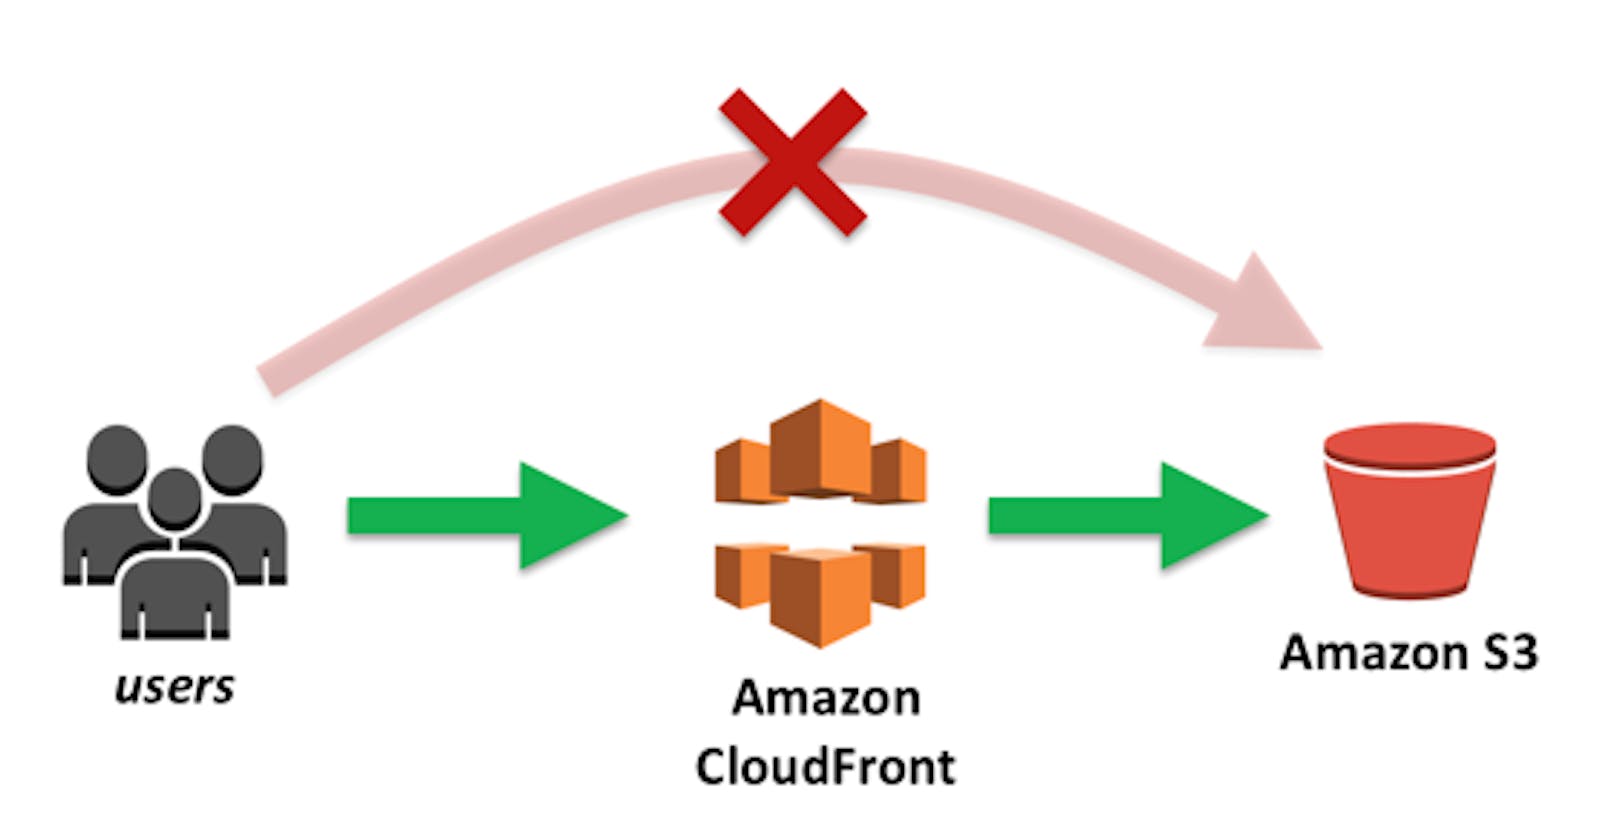 Serving media from Amazon S3 to your frontend application in a cost-effective and secure manner